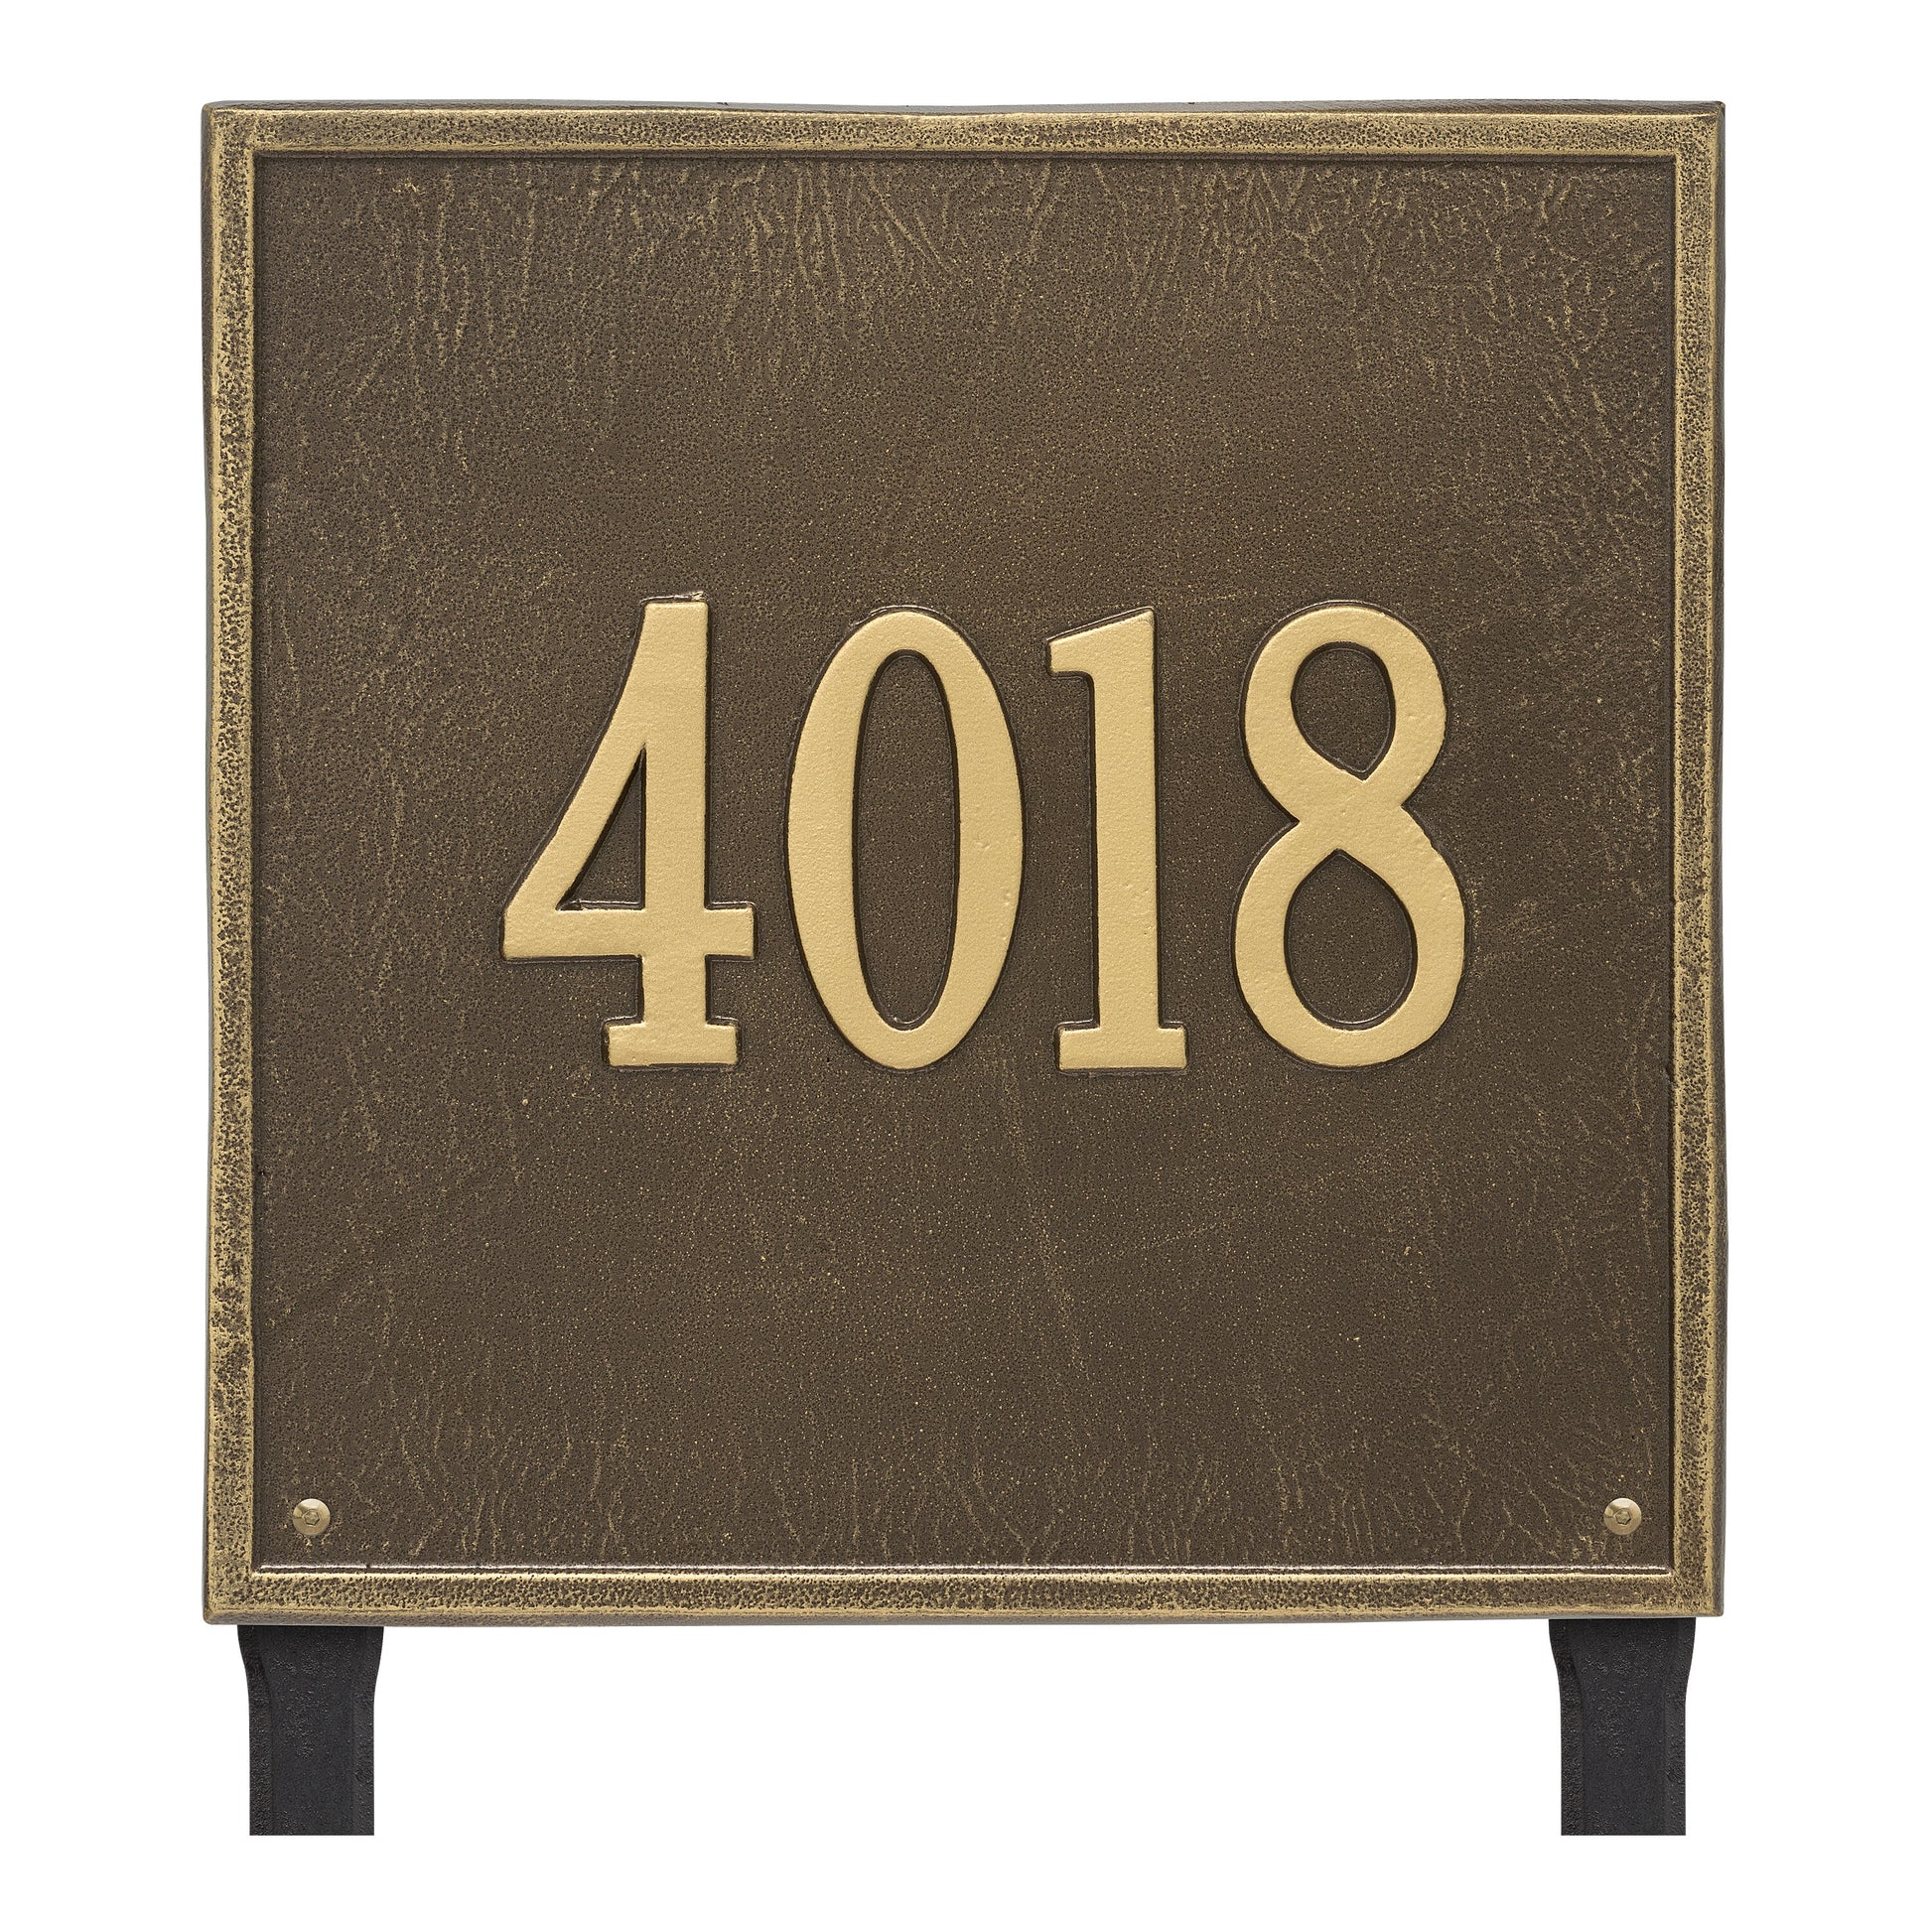 Whitehall Products Personalized Square Estate Lawn Plaque One Line Antique Brass